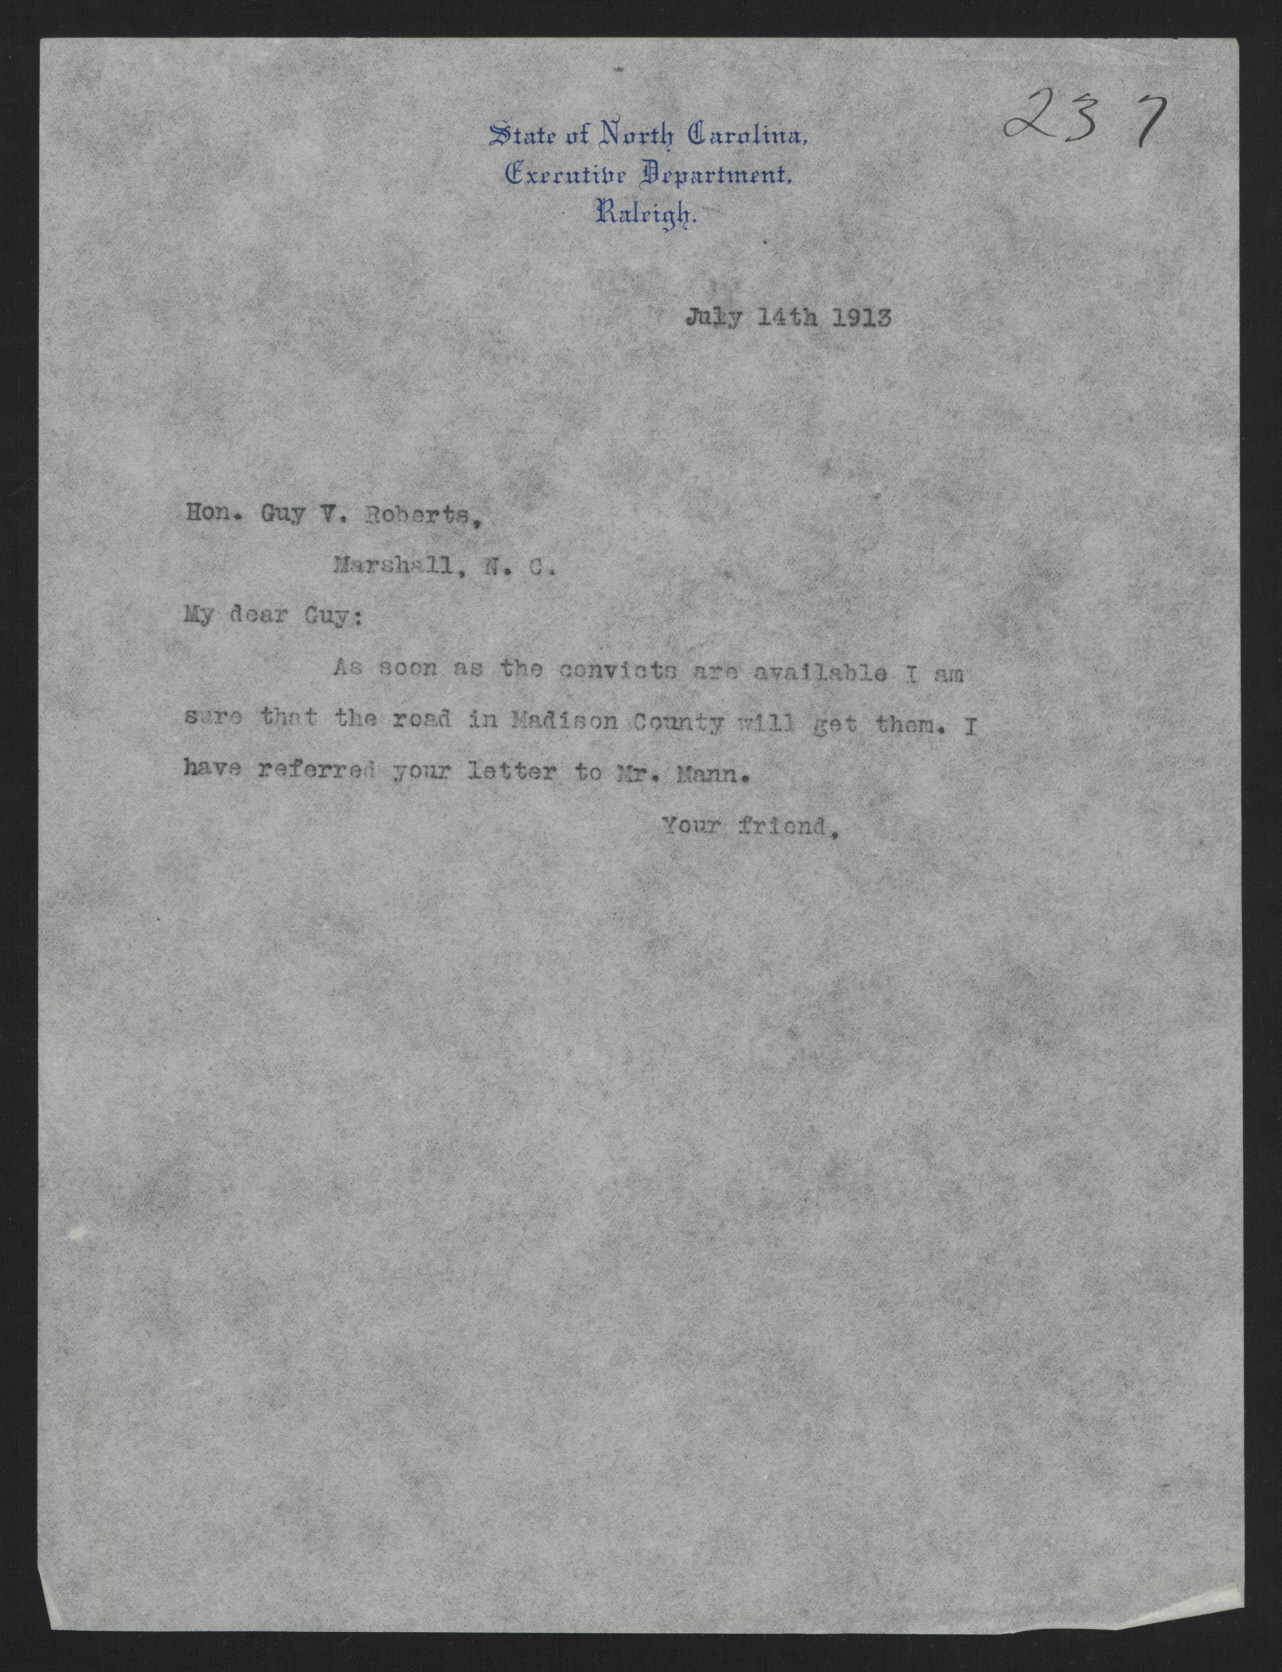 Letter from Craig to Roberts, July 14, 1913